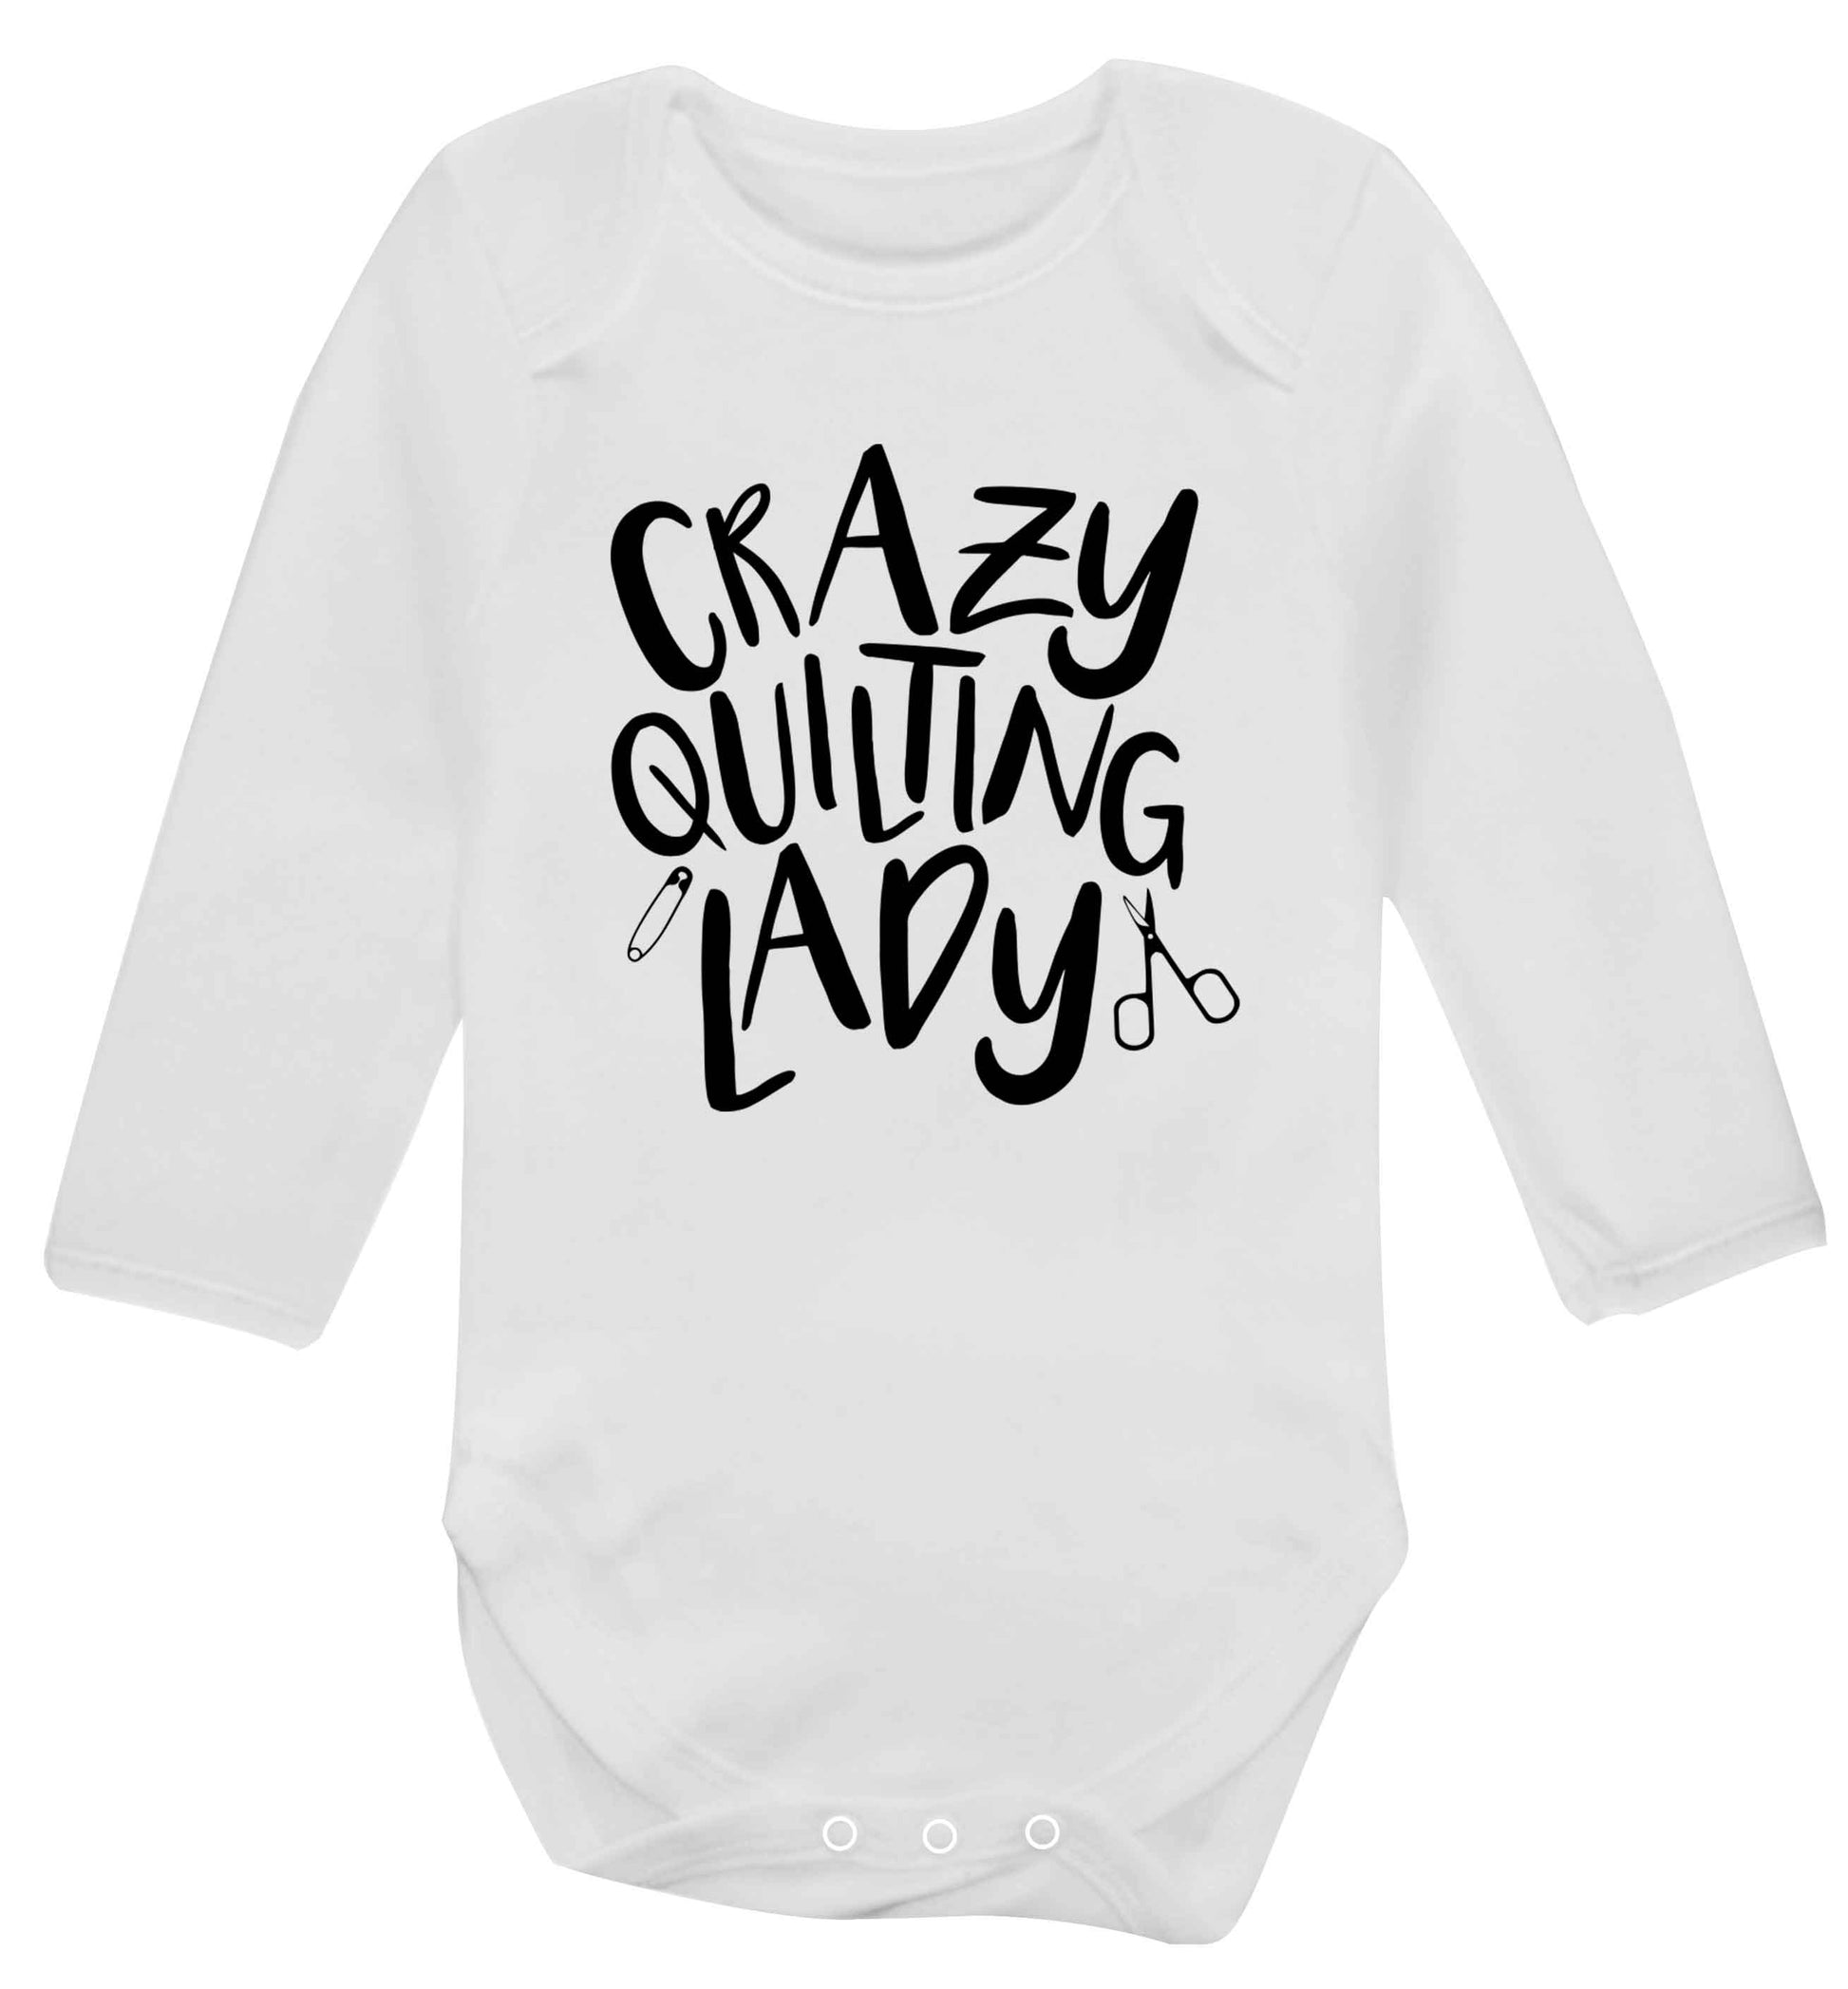 Crazy quilting lady Baby Vest long sleeved white 6-12 months